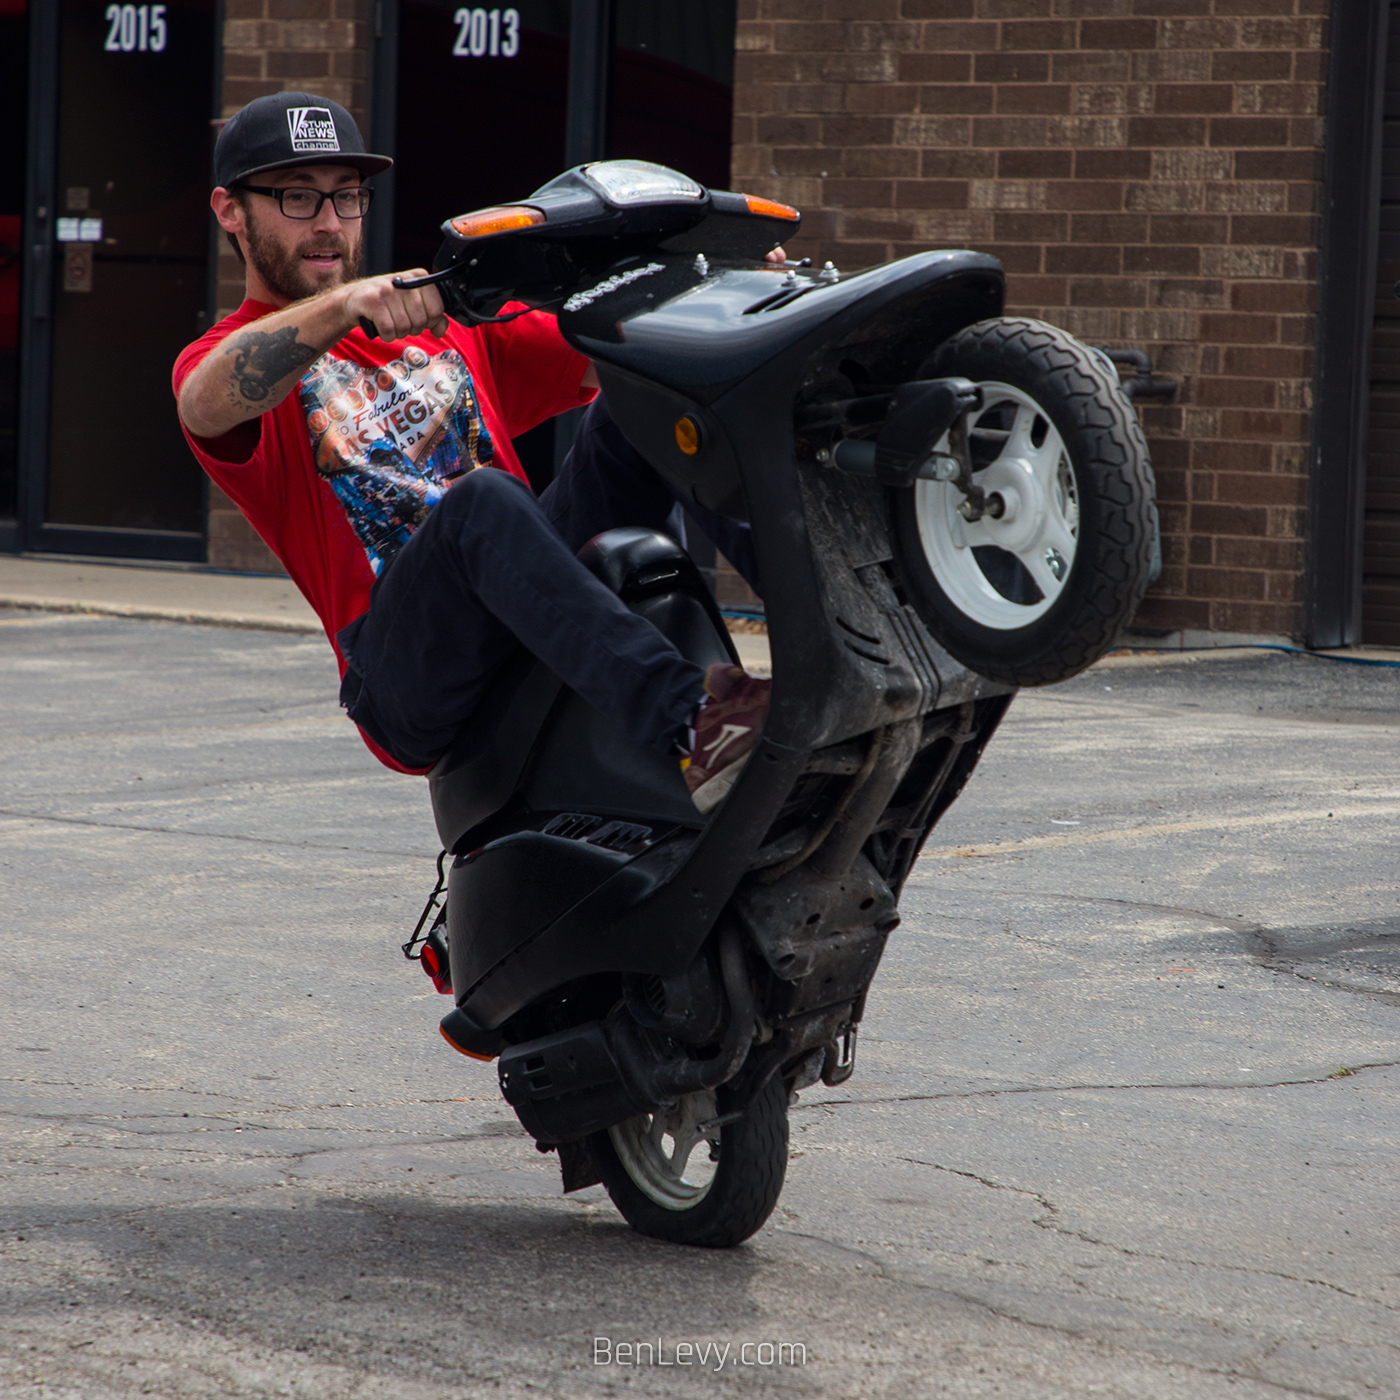 Justin Bianco doing a Wheelie on a Scooter